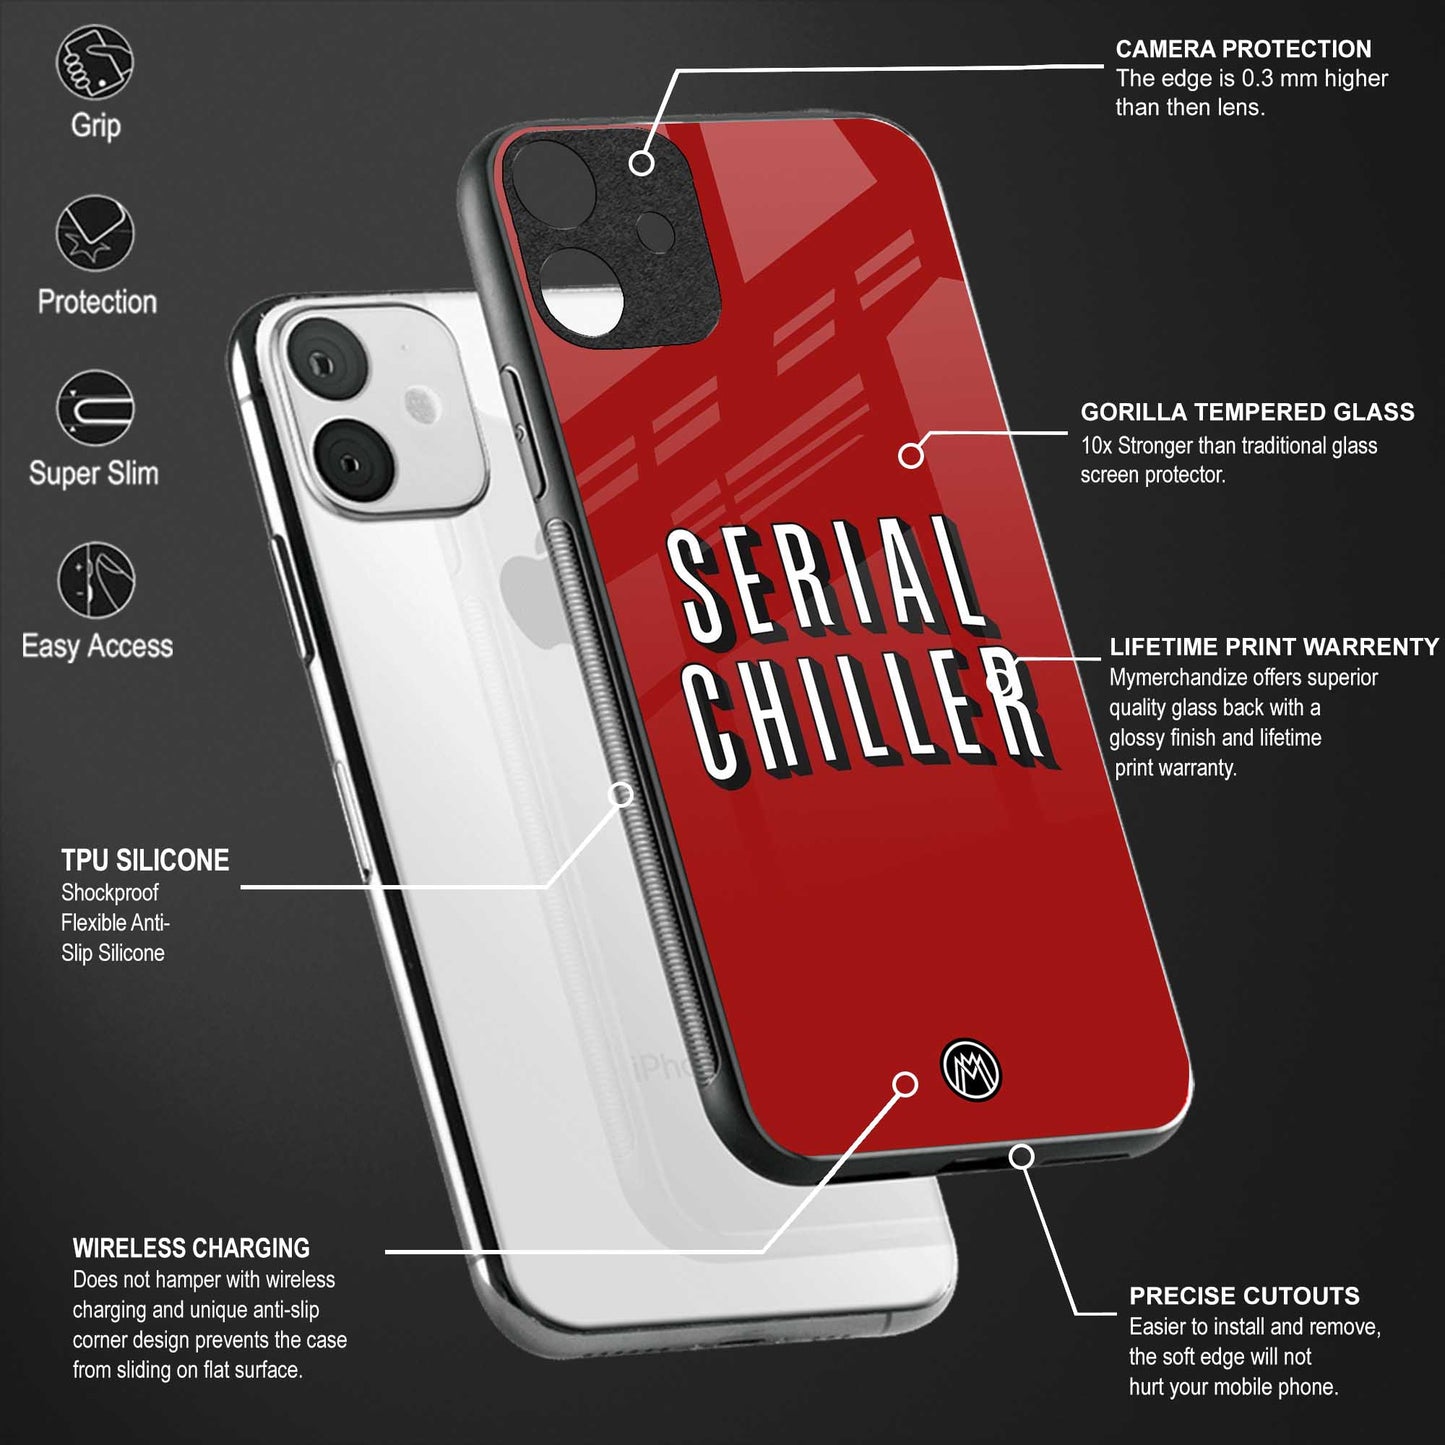 Serial-Chiller-Netflix-Glass-Case for phone case | glass case for samsung galaxy s23